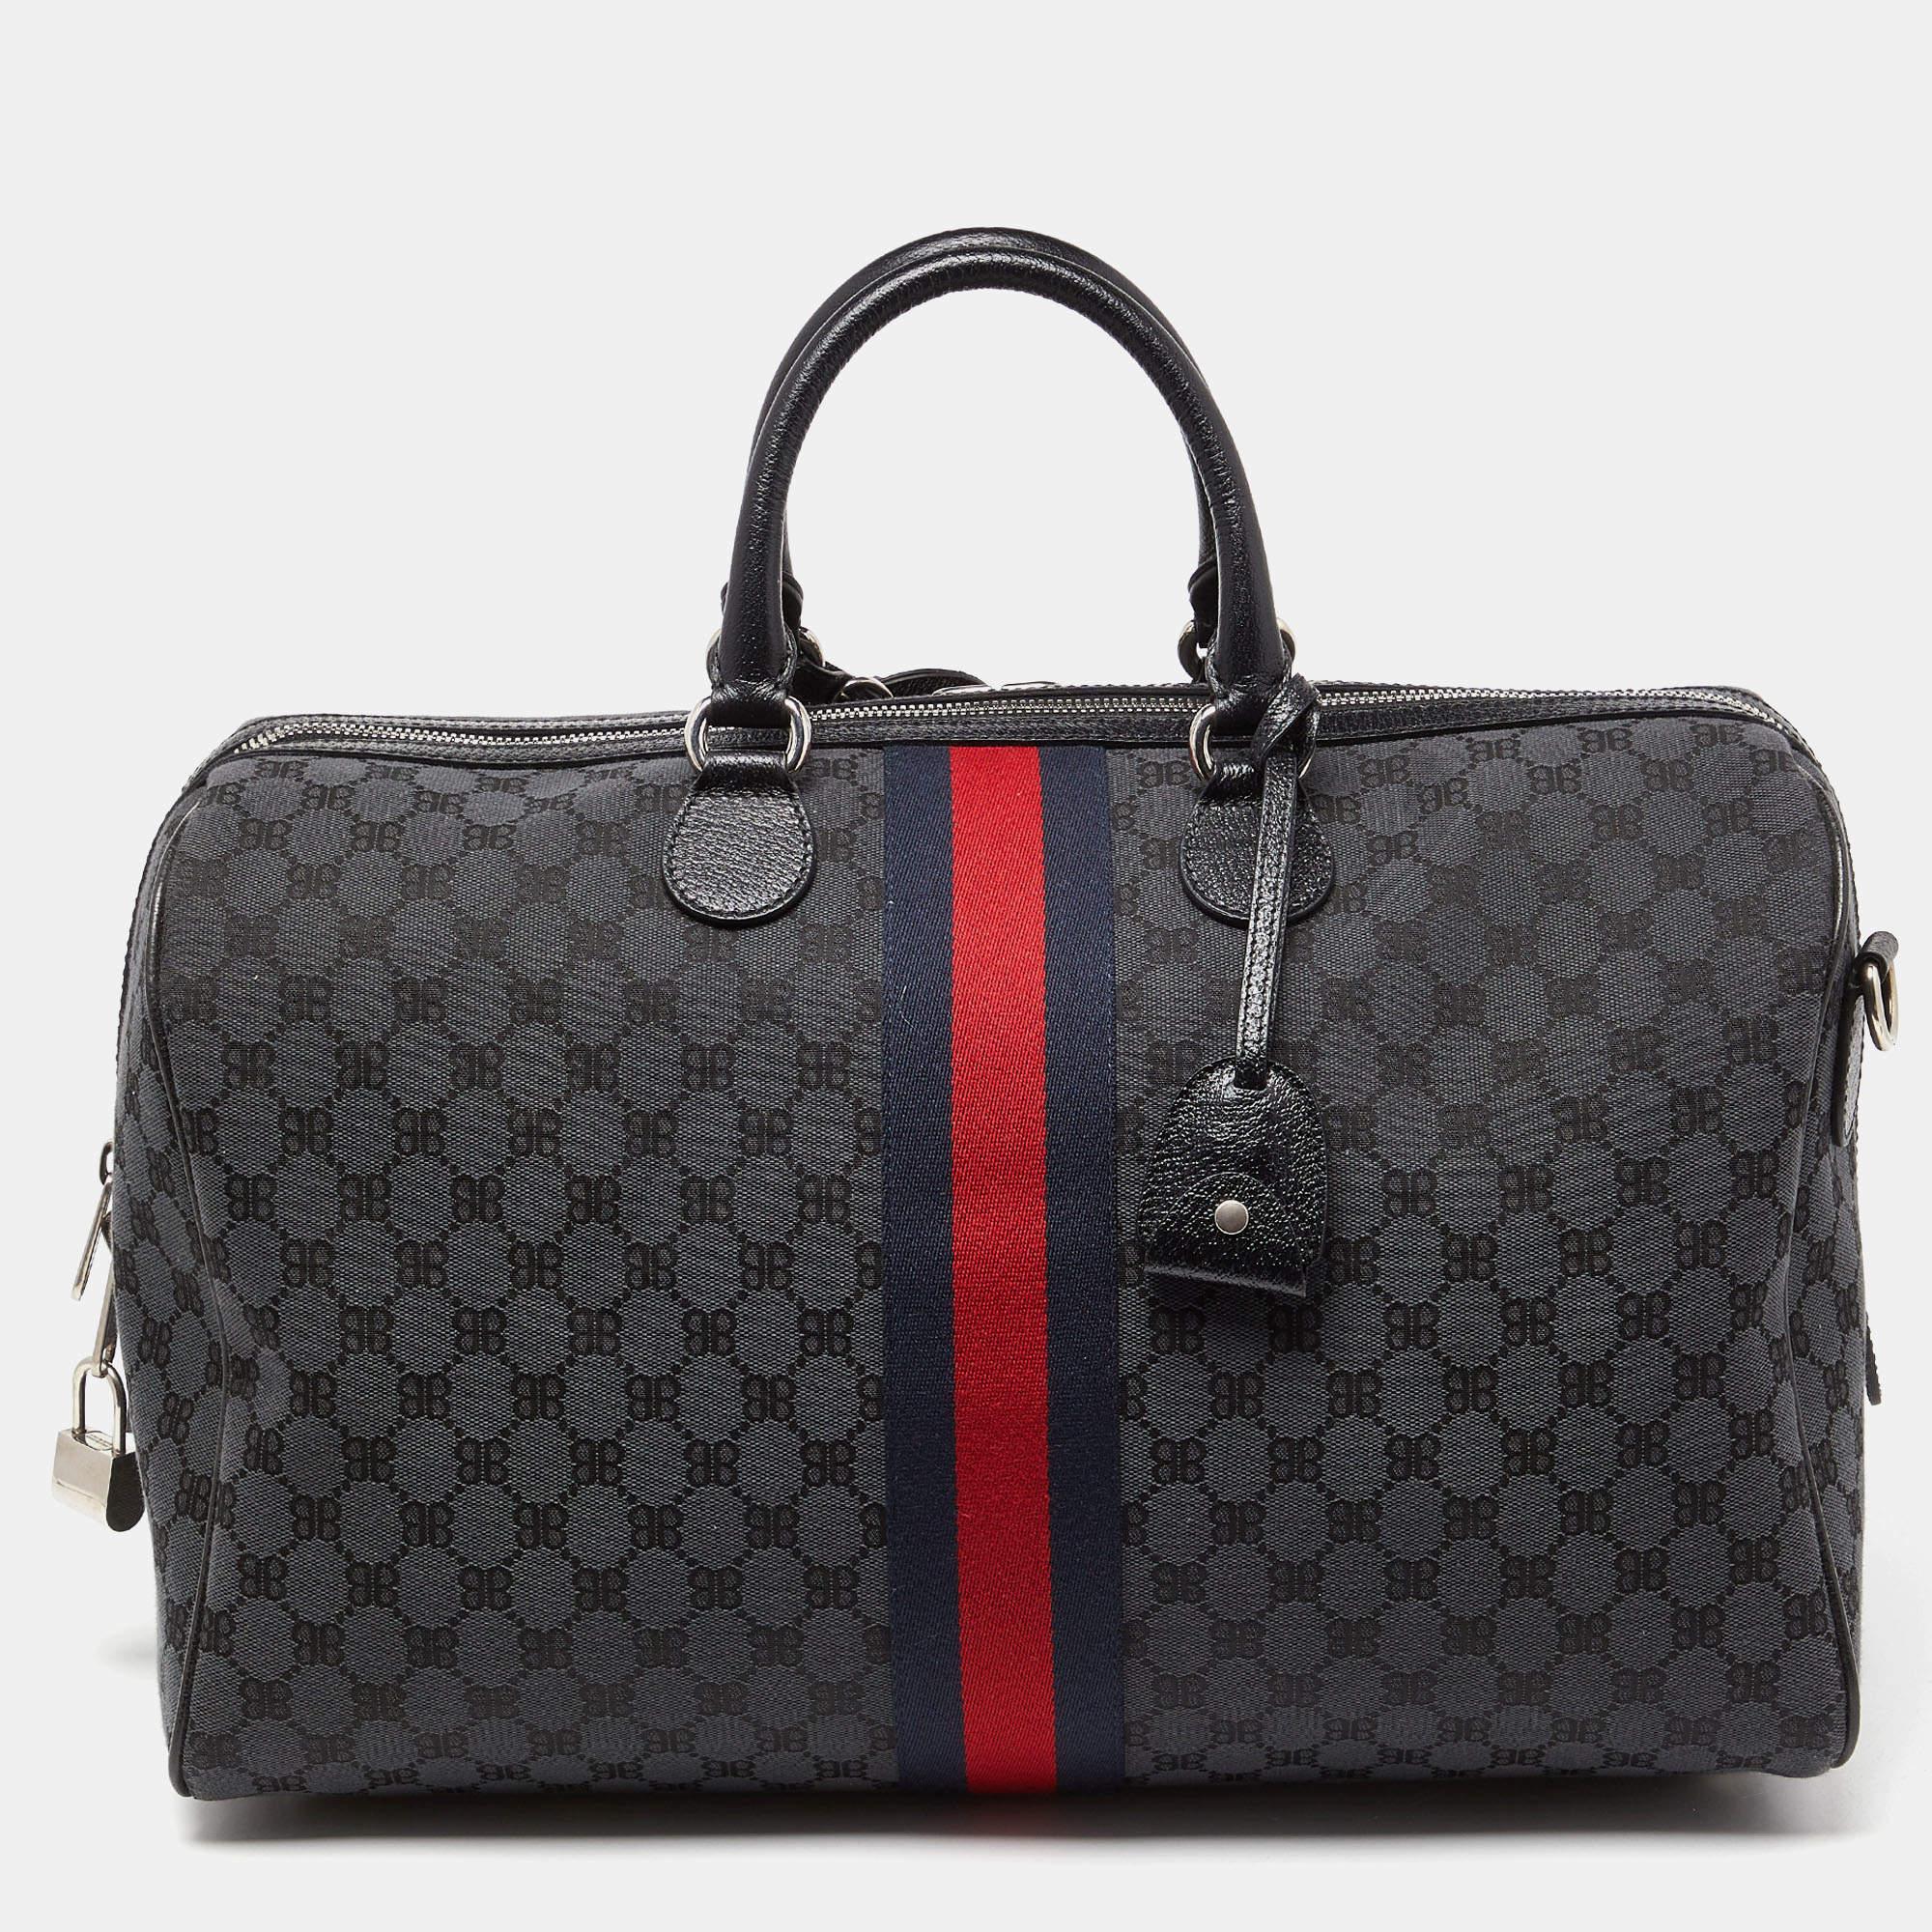 Balenciaga x Gucci Black Canvas and Leather The Hacker Project Duffle Bag 9